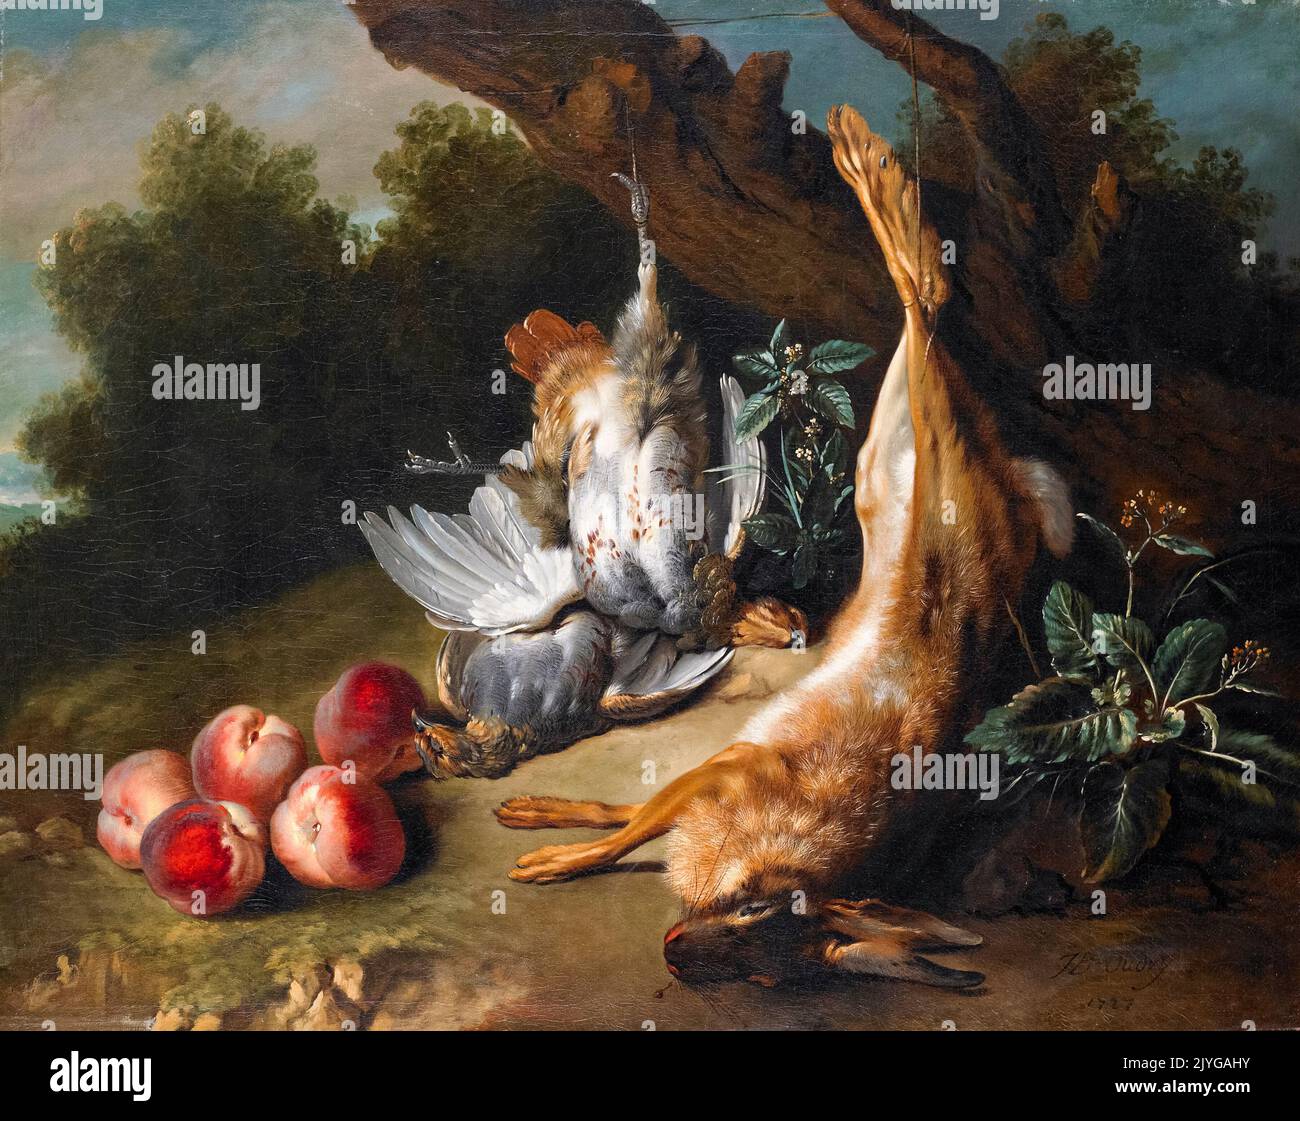 Jean Baptiste Oudry, Still Life with Dead Game and Peaches in a Landscape, painting in oil on canvas, circa 1725 Stock Photo